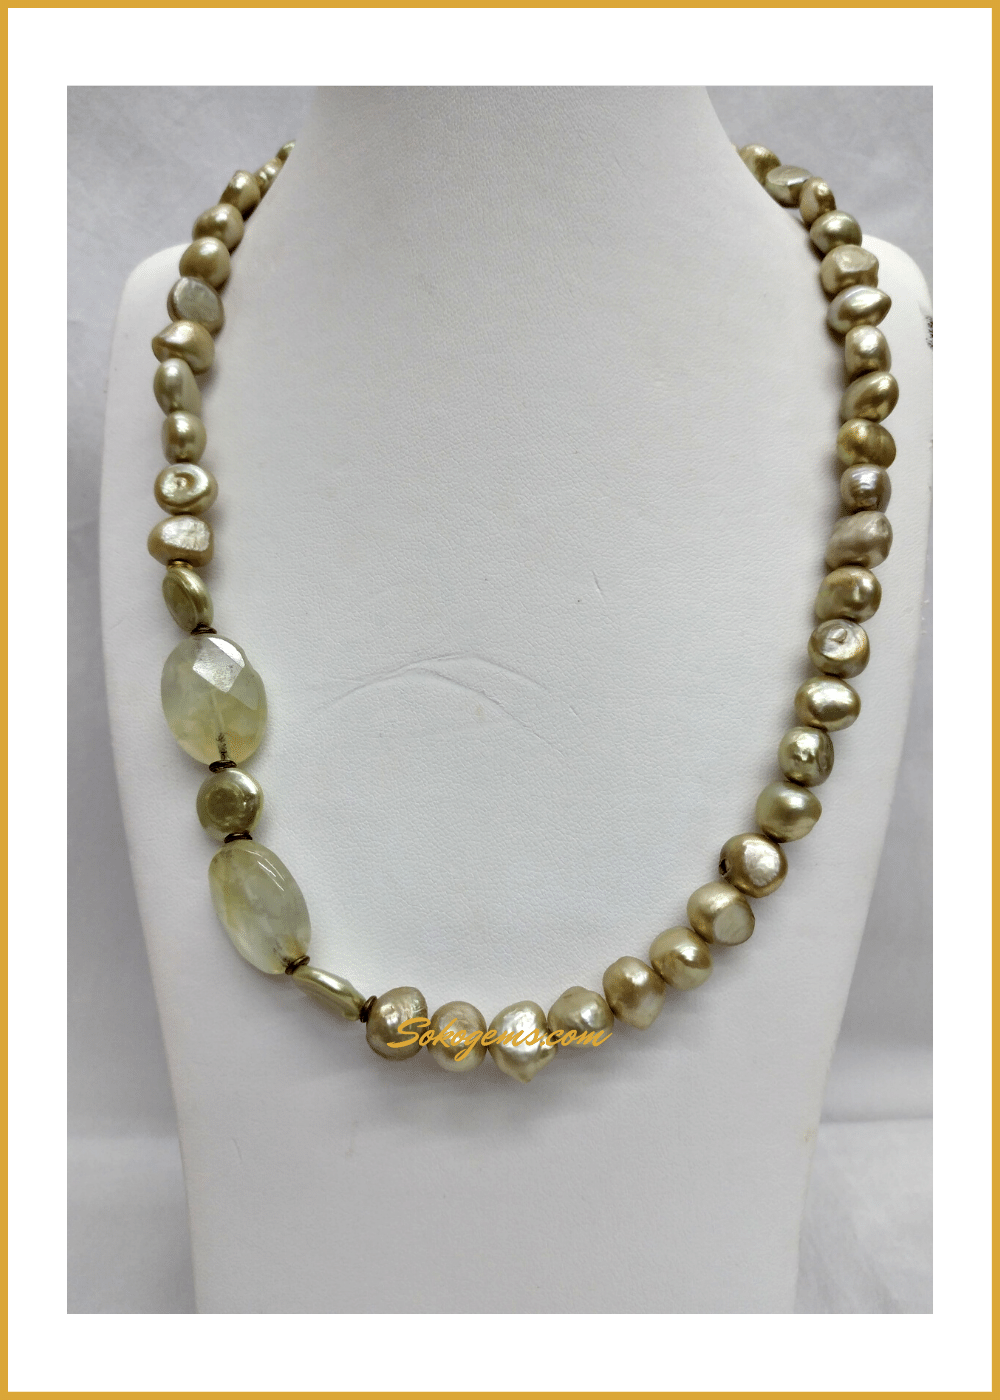 Buy Pearls and Prehnite Necklace on Sokogems